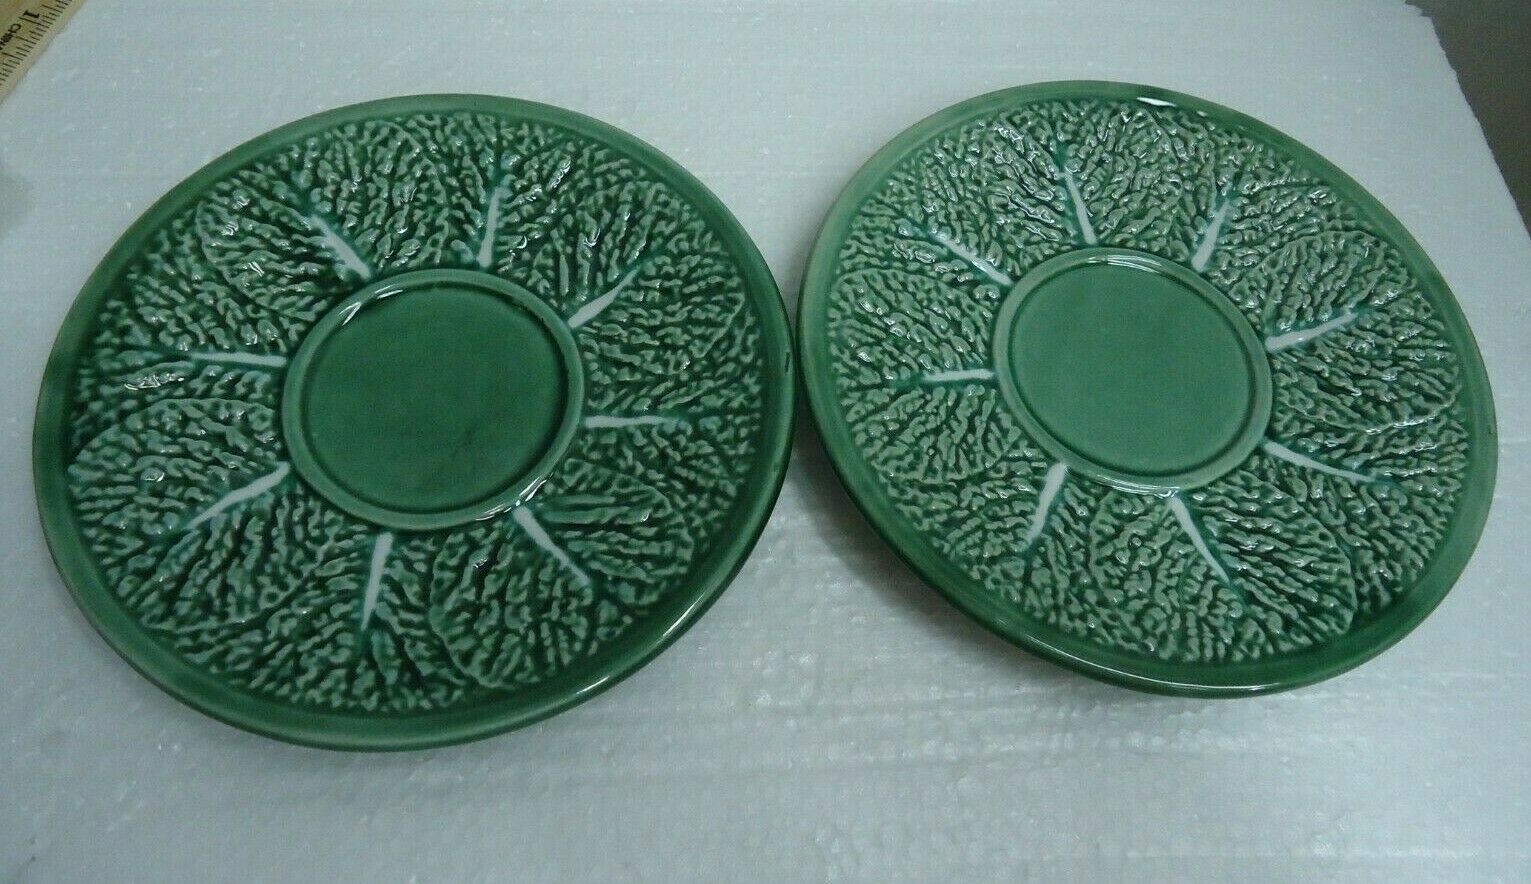 g144 Bordallo Pinheiro 2 SAUCERS ONLY Green Cabbage leaves Portuguese pottery - $12.00